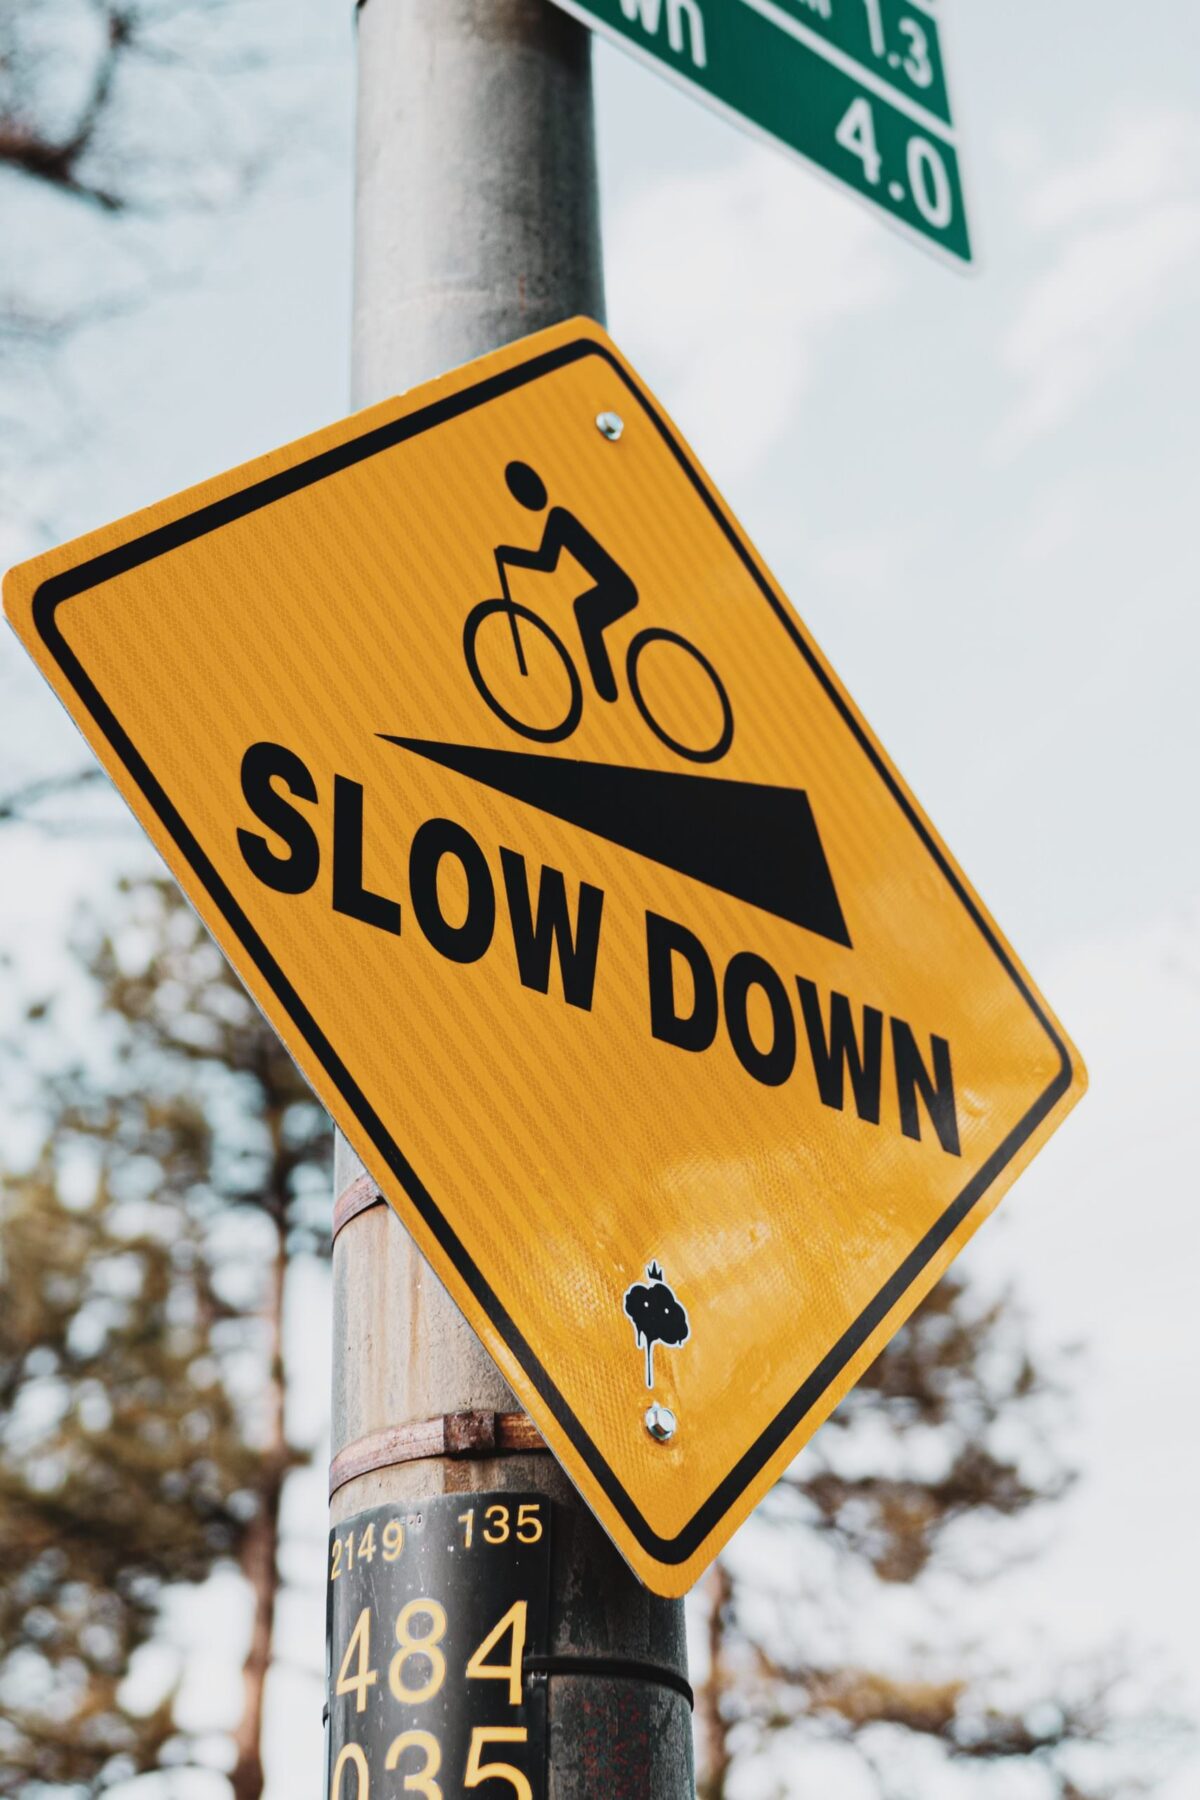 street sign "slow down"